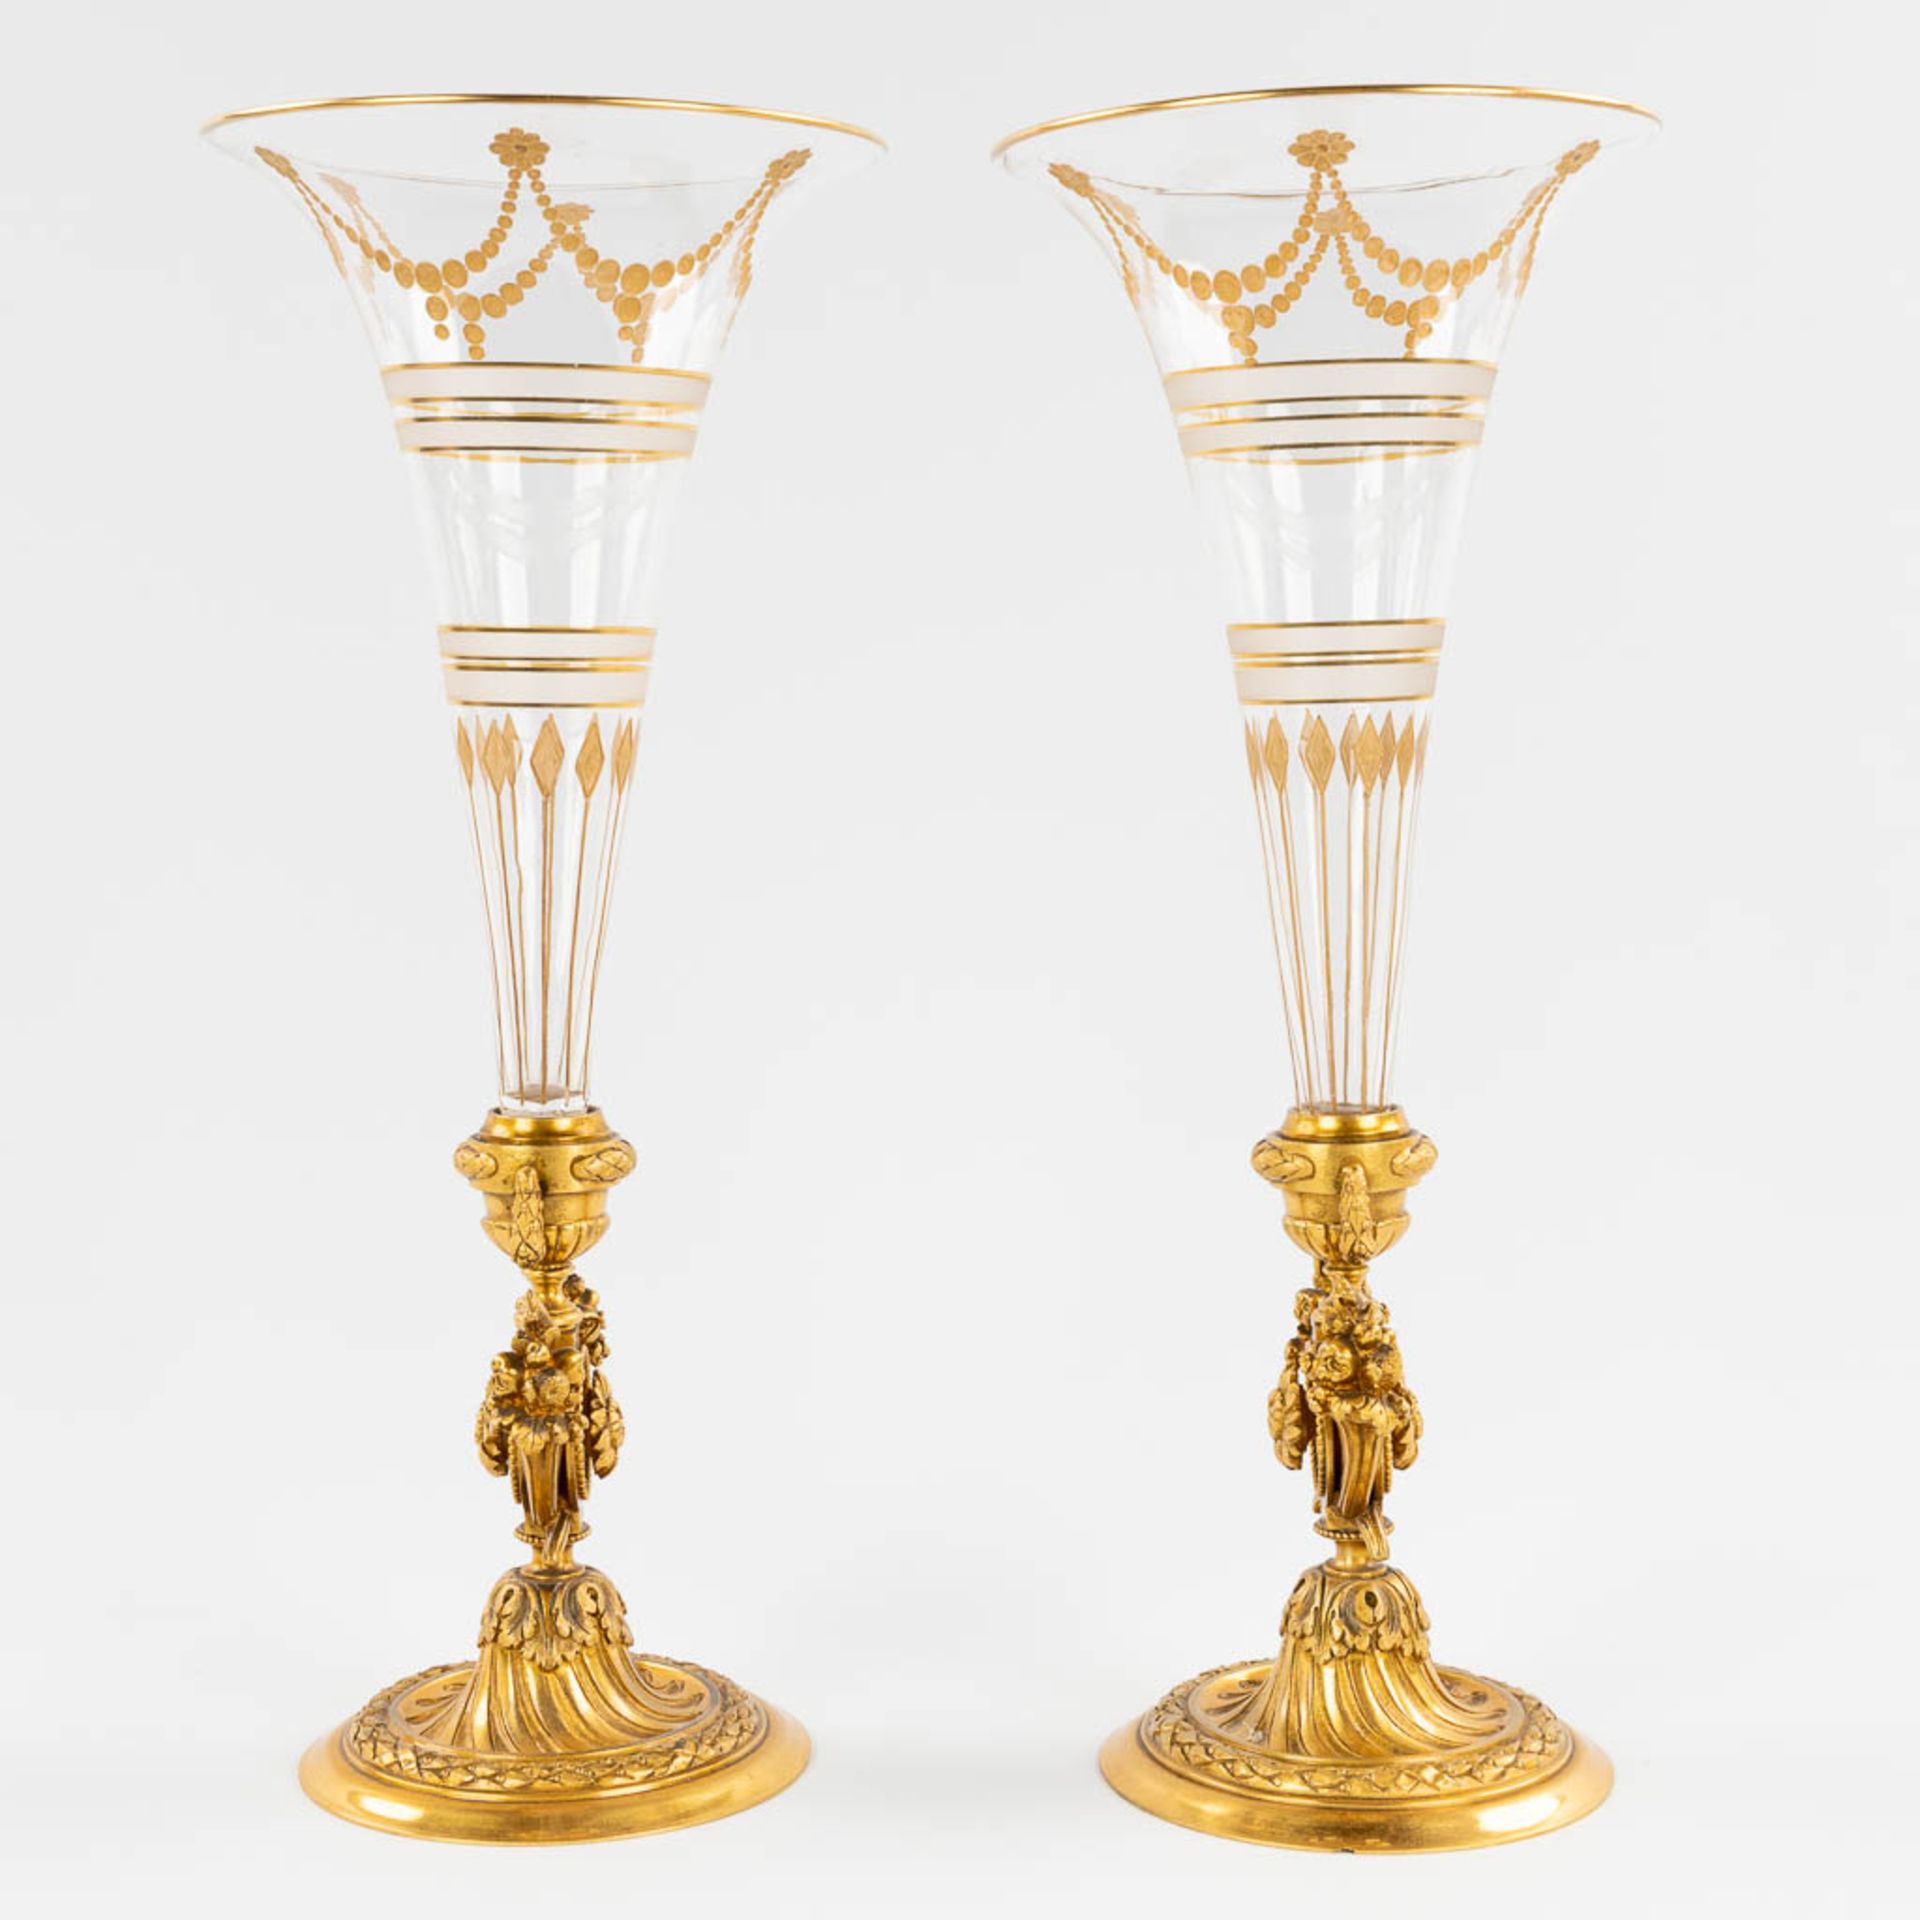 A pair of trumpet vases, gilt bronze and glass in Louis XVI style. 19th C. (H:31,5 x D:13 cm) - Image 3 of 13